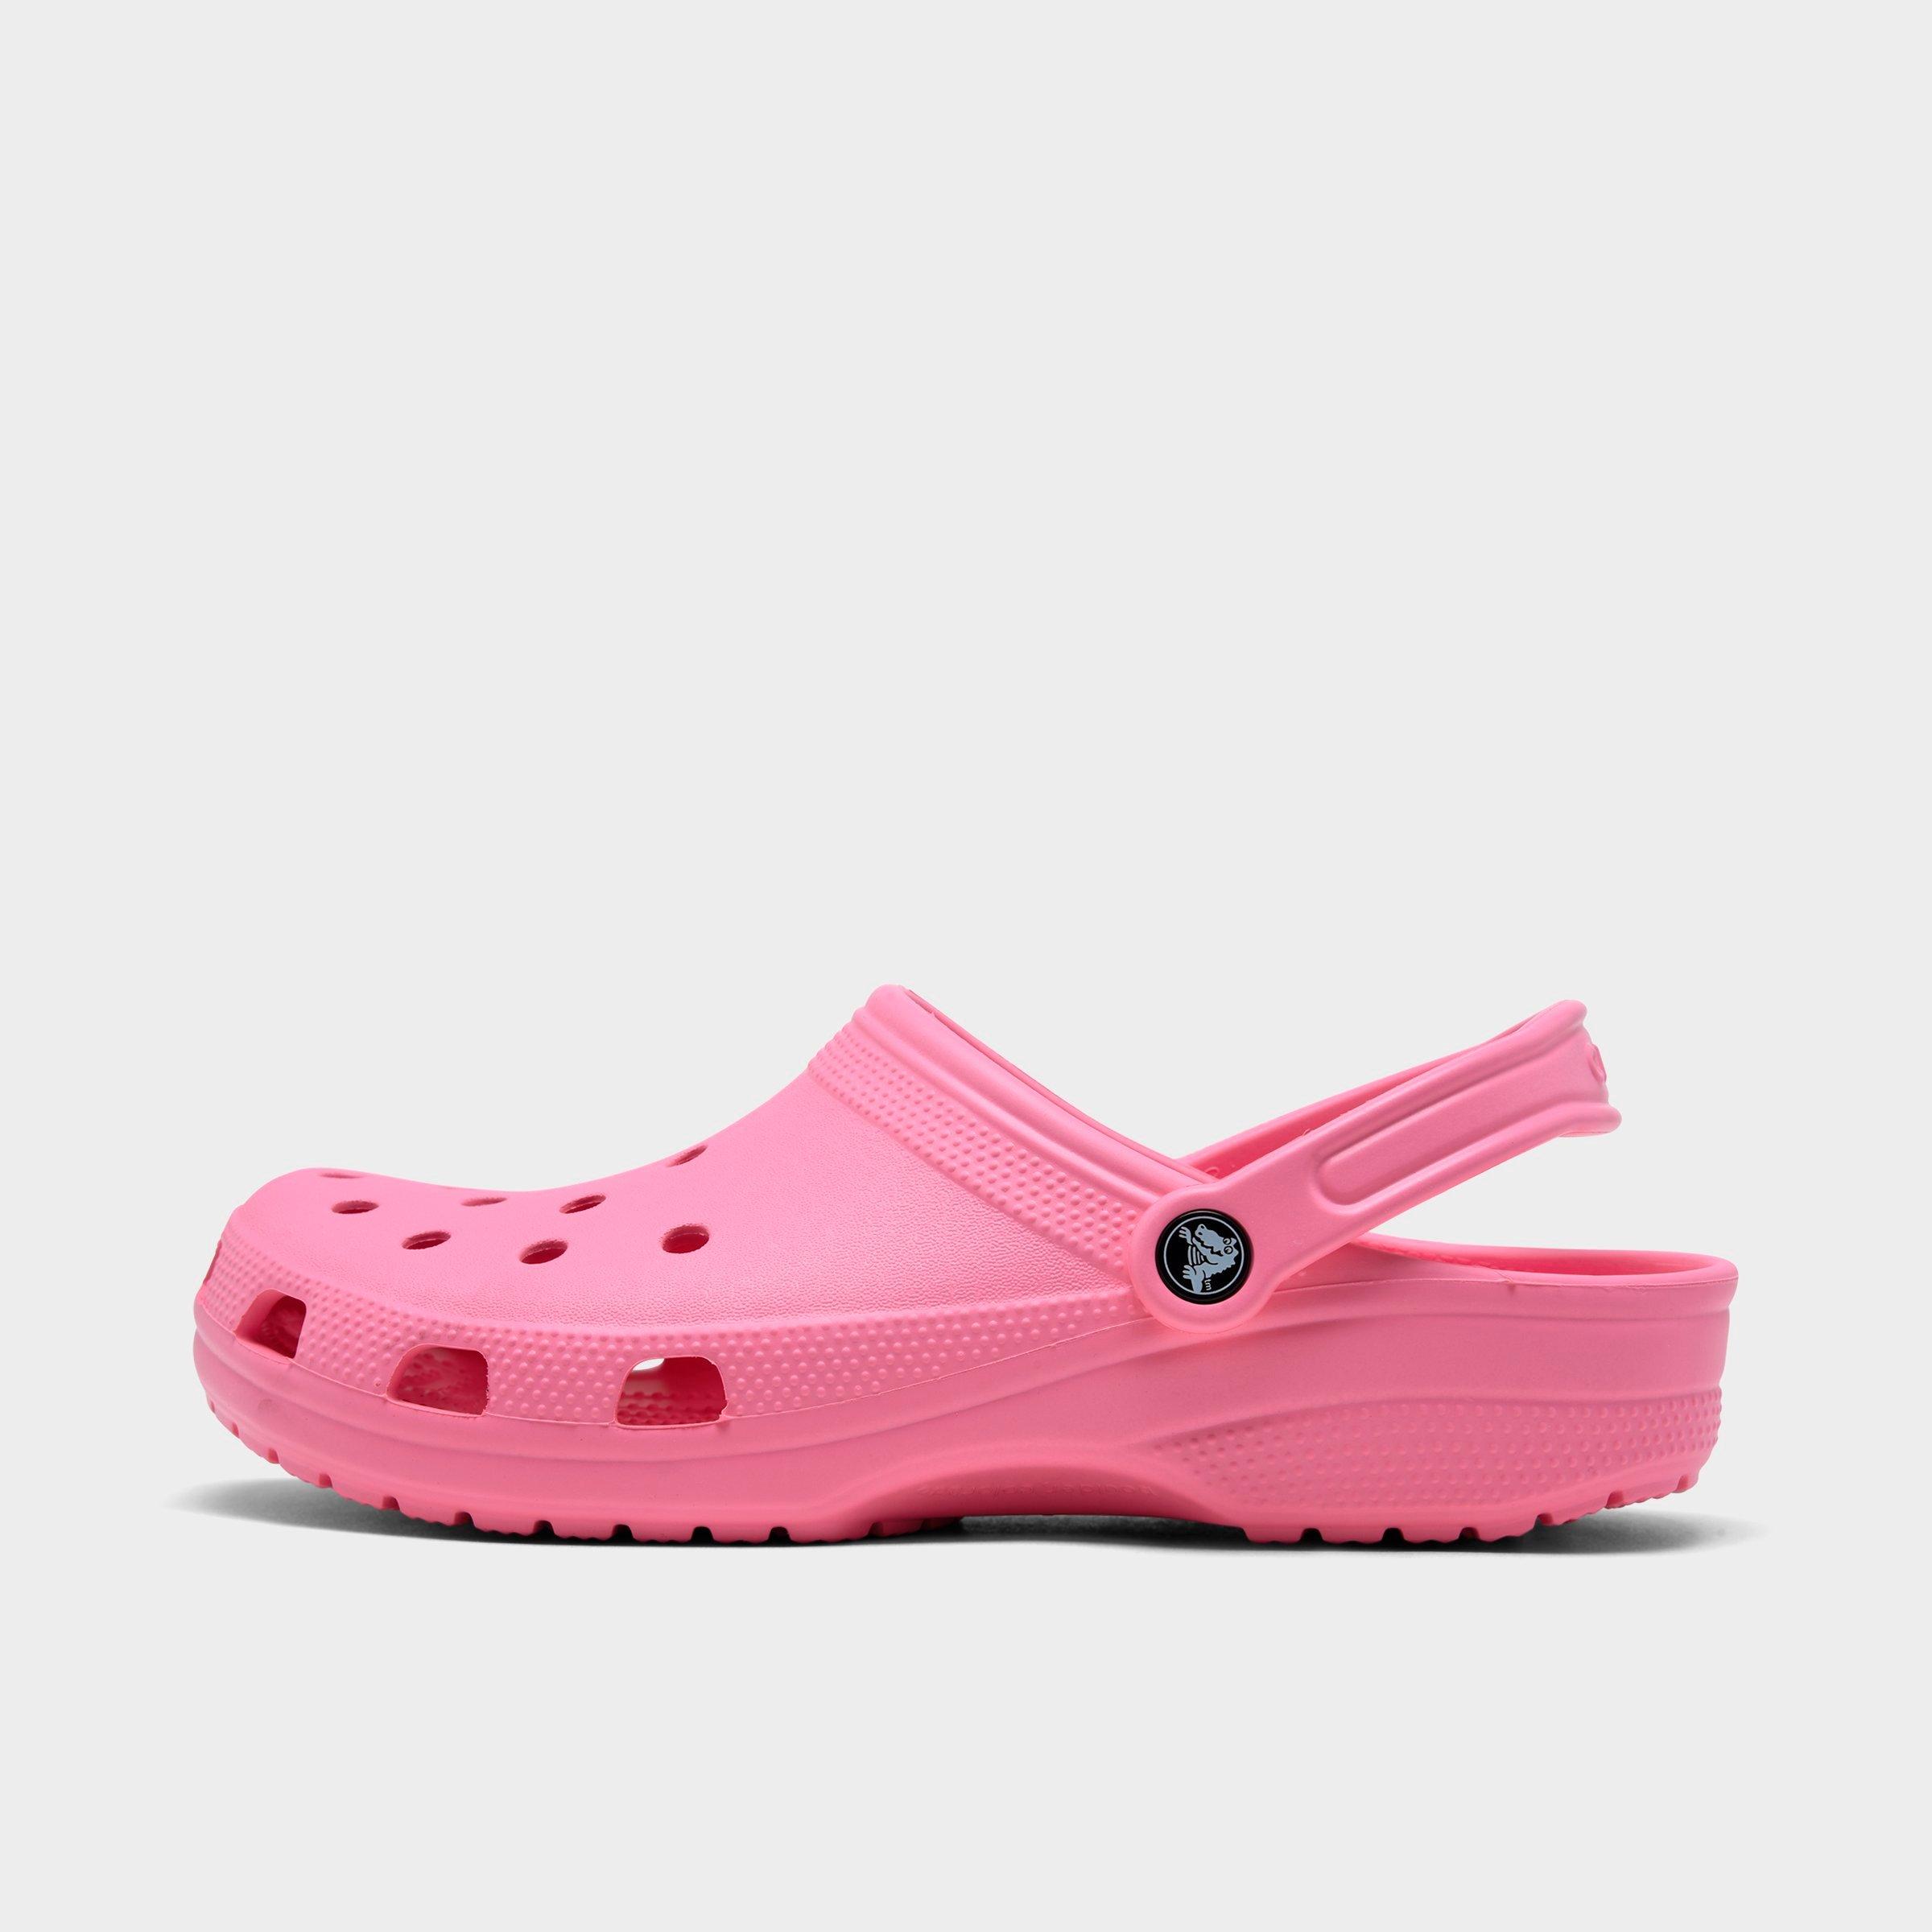 crocs buy now pay later